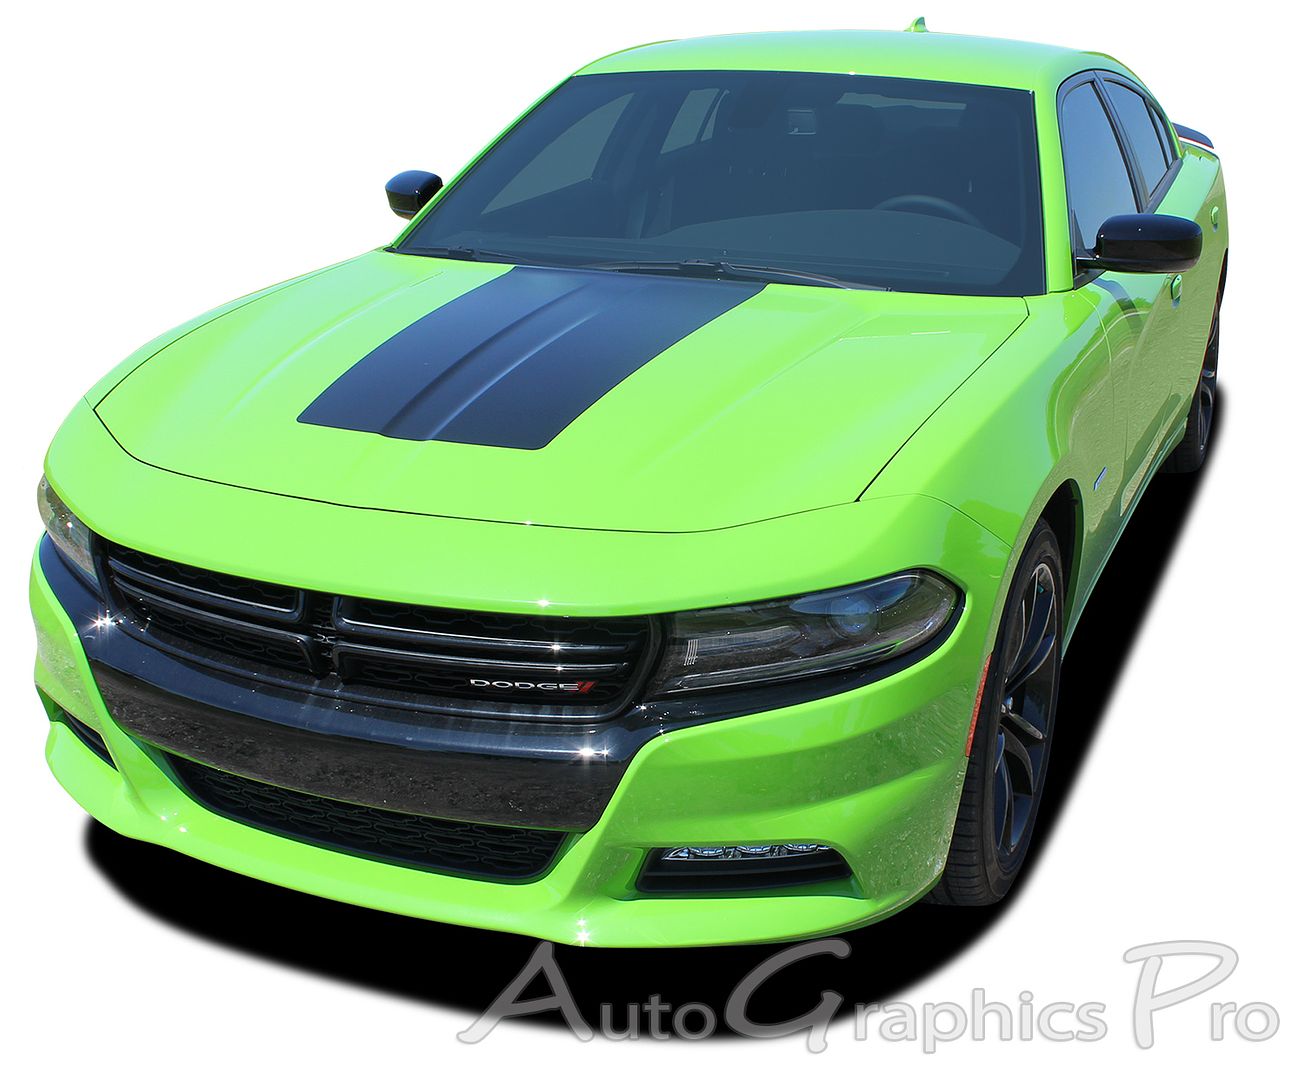 2015-2018 Dodge Charger Hood Blackout Rally Stripes Racing Graphics Decals